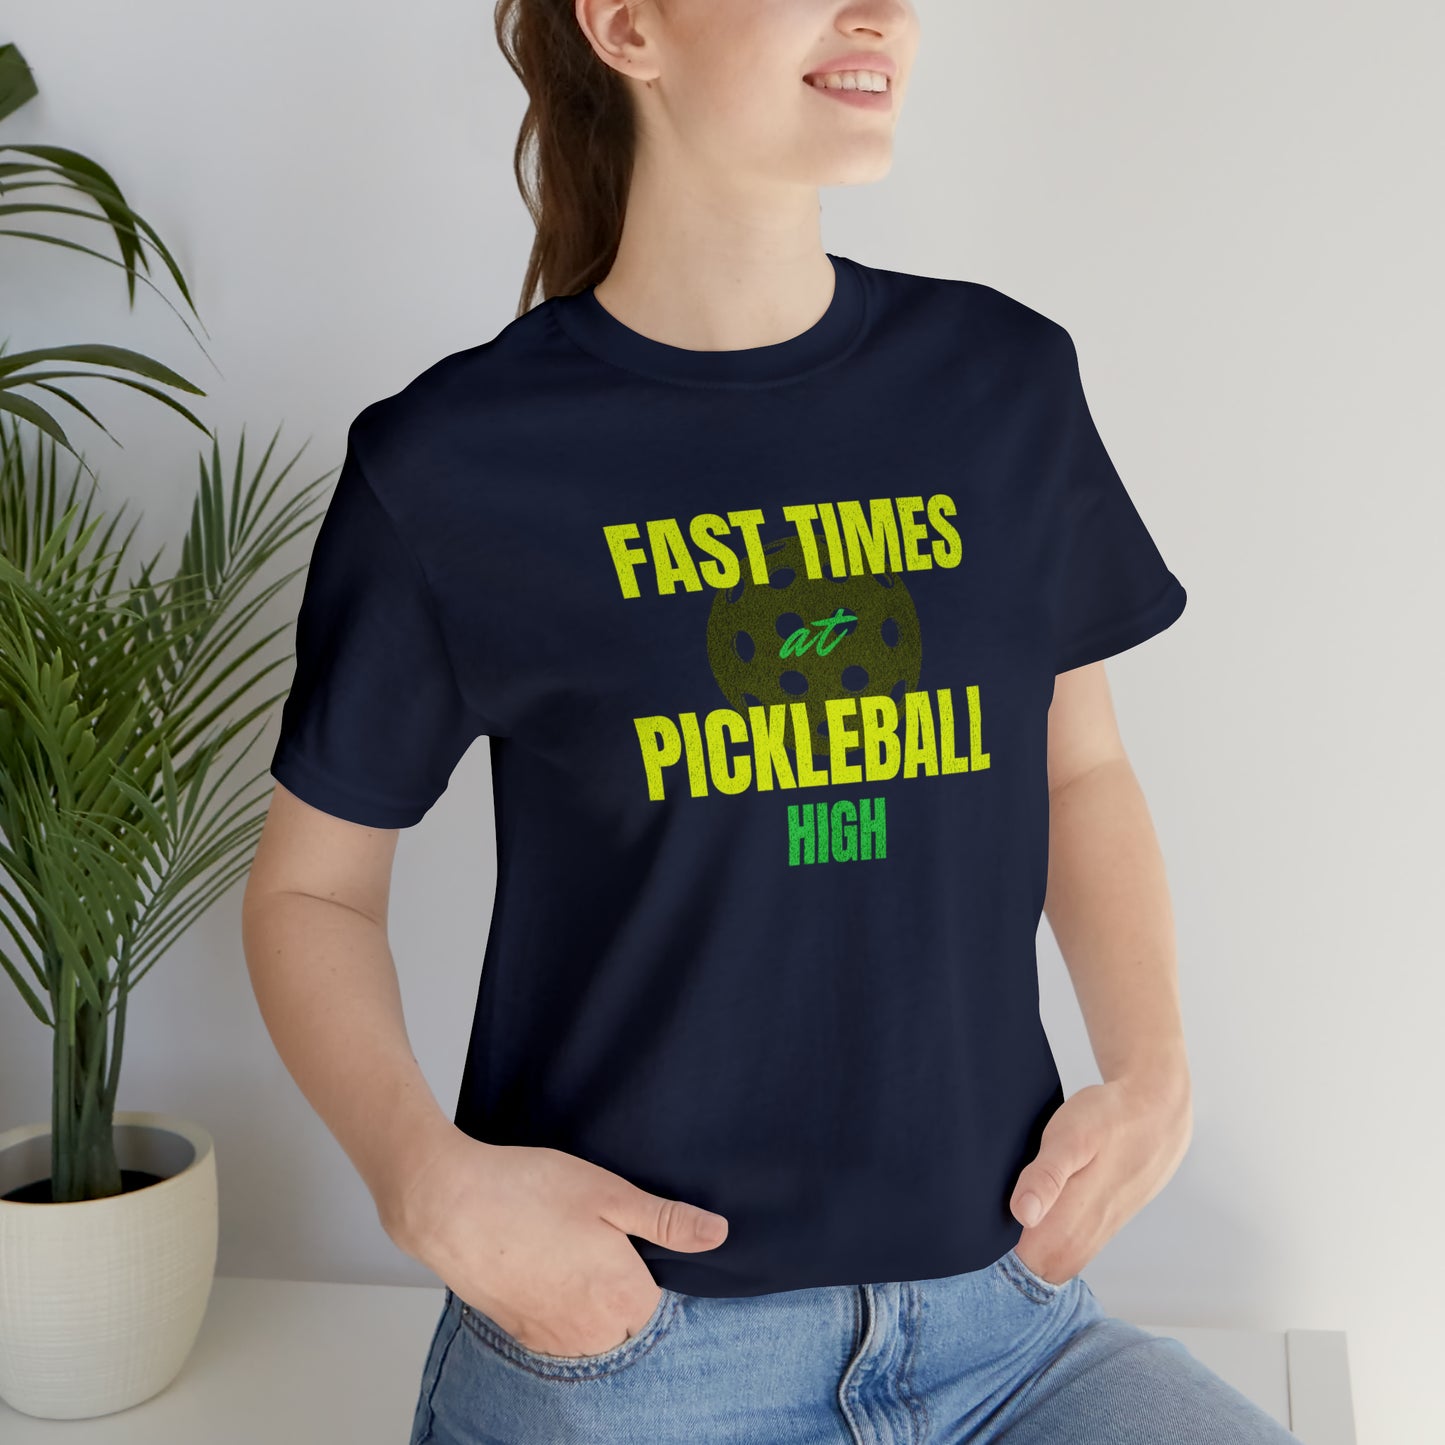 Fast Times at Pickleball High: T-Shirt